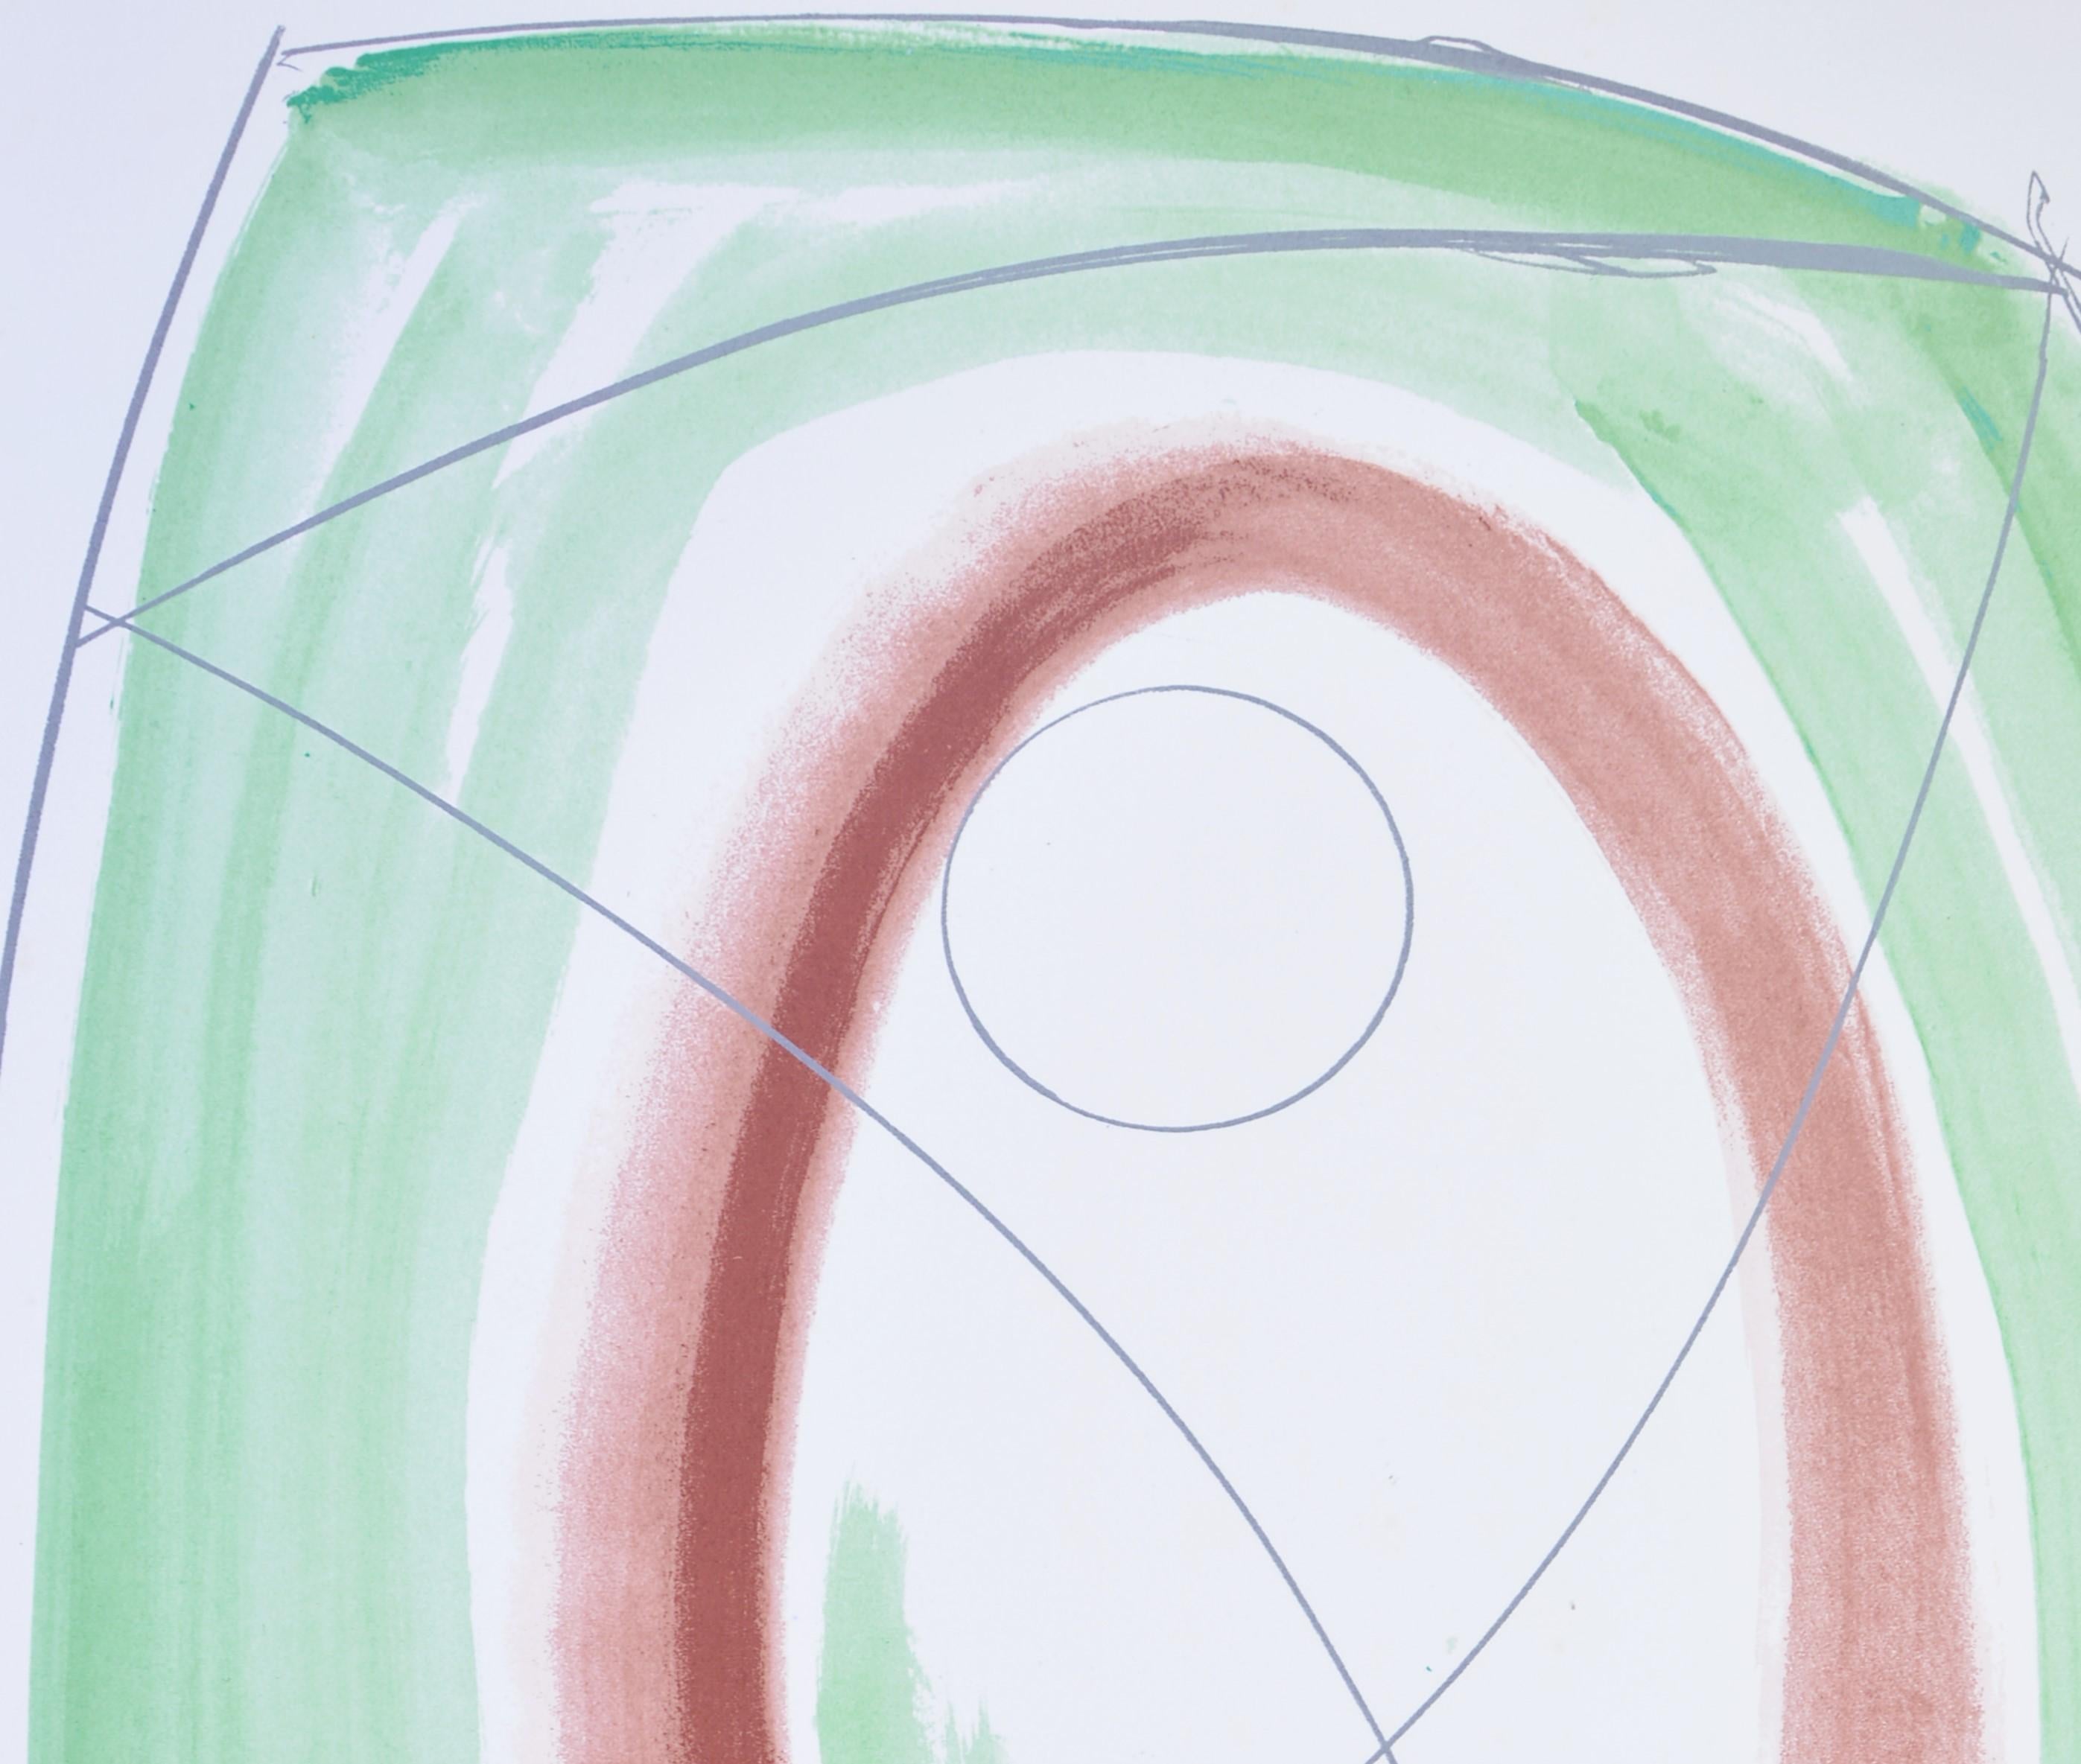 A lesser known side of Barbara Hepworth’s artistic oeuvre are her works on paper. Showcasing her incredible draftmanship, the artist said of her ‘Opposing Form’s’ series, that the drawings were ‘sculptures born in the disguise of two